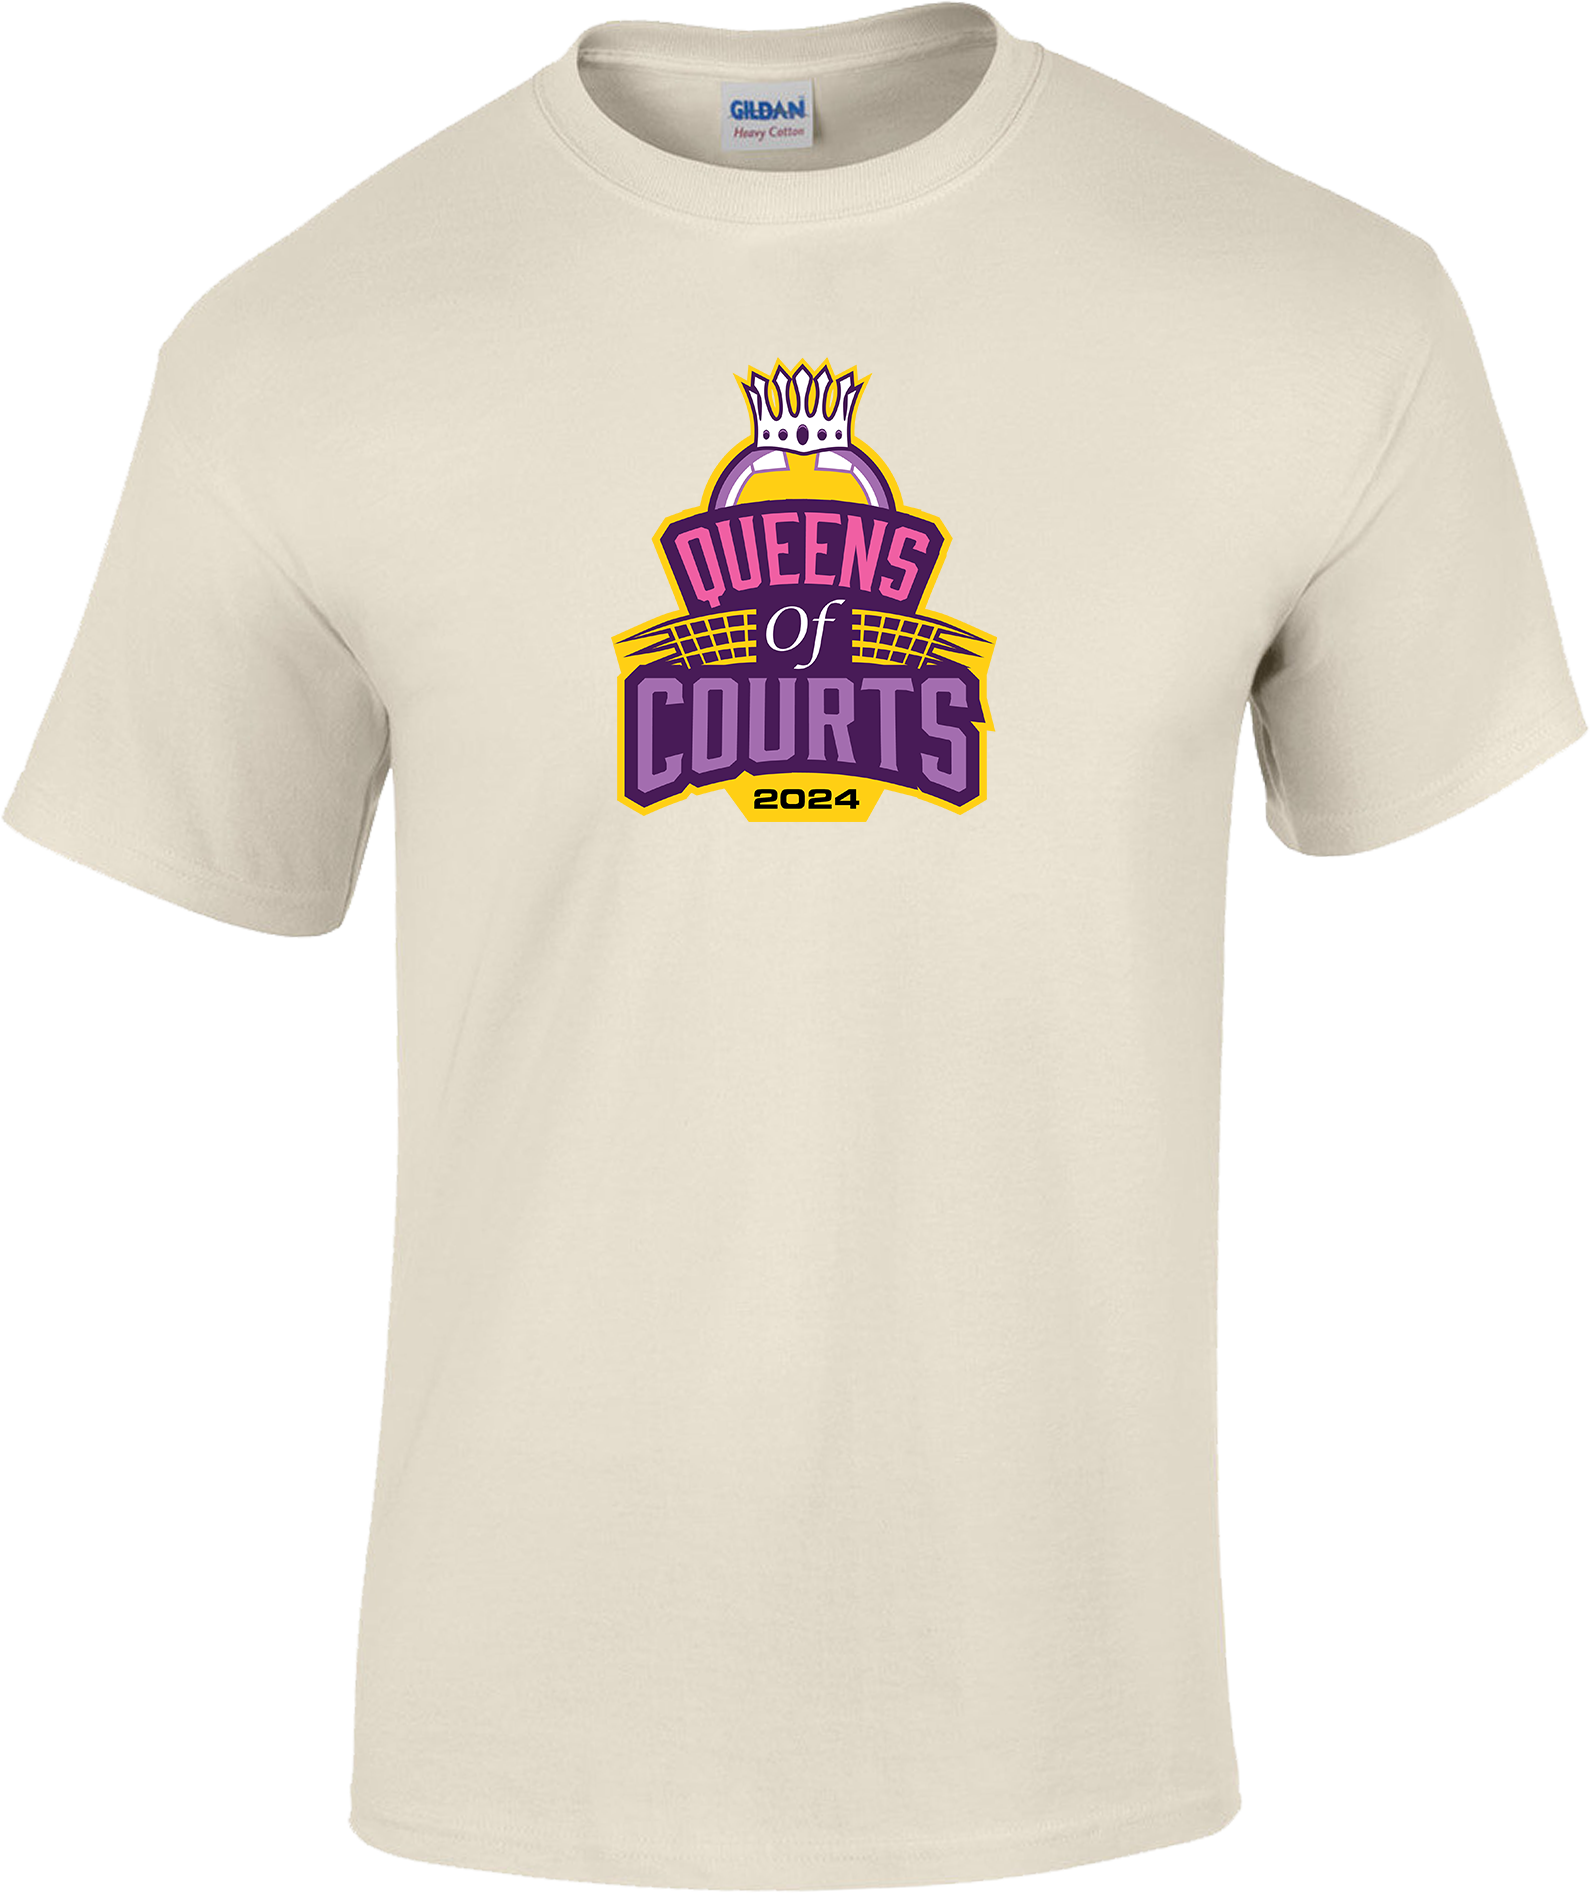 Short Sleeves - 2024 Queens Of Courts